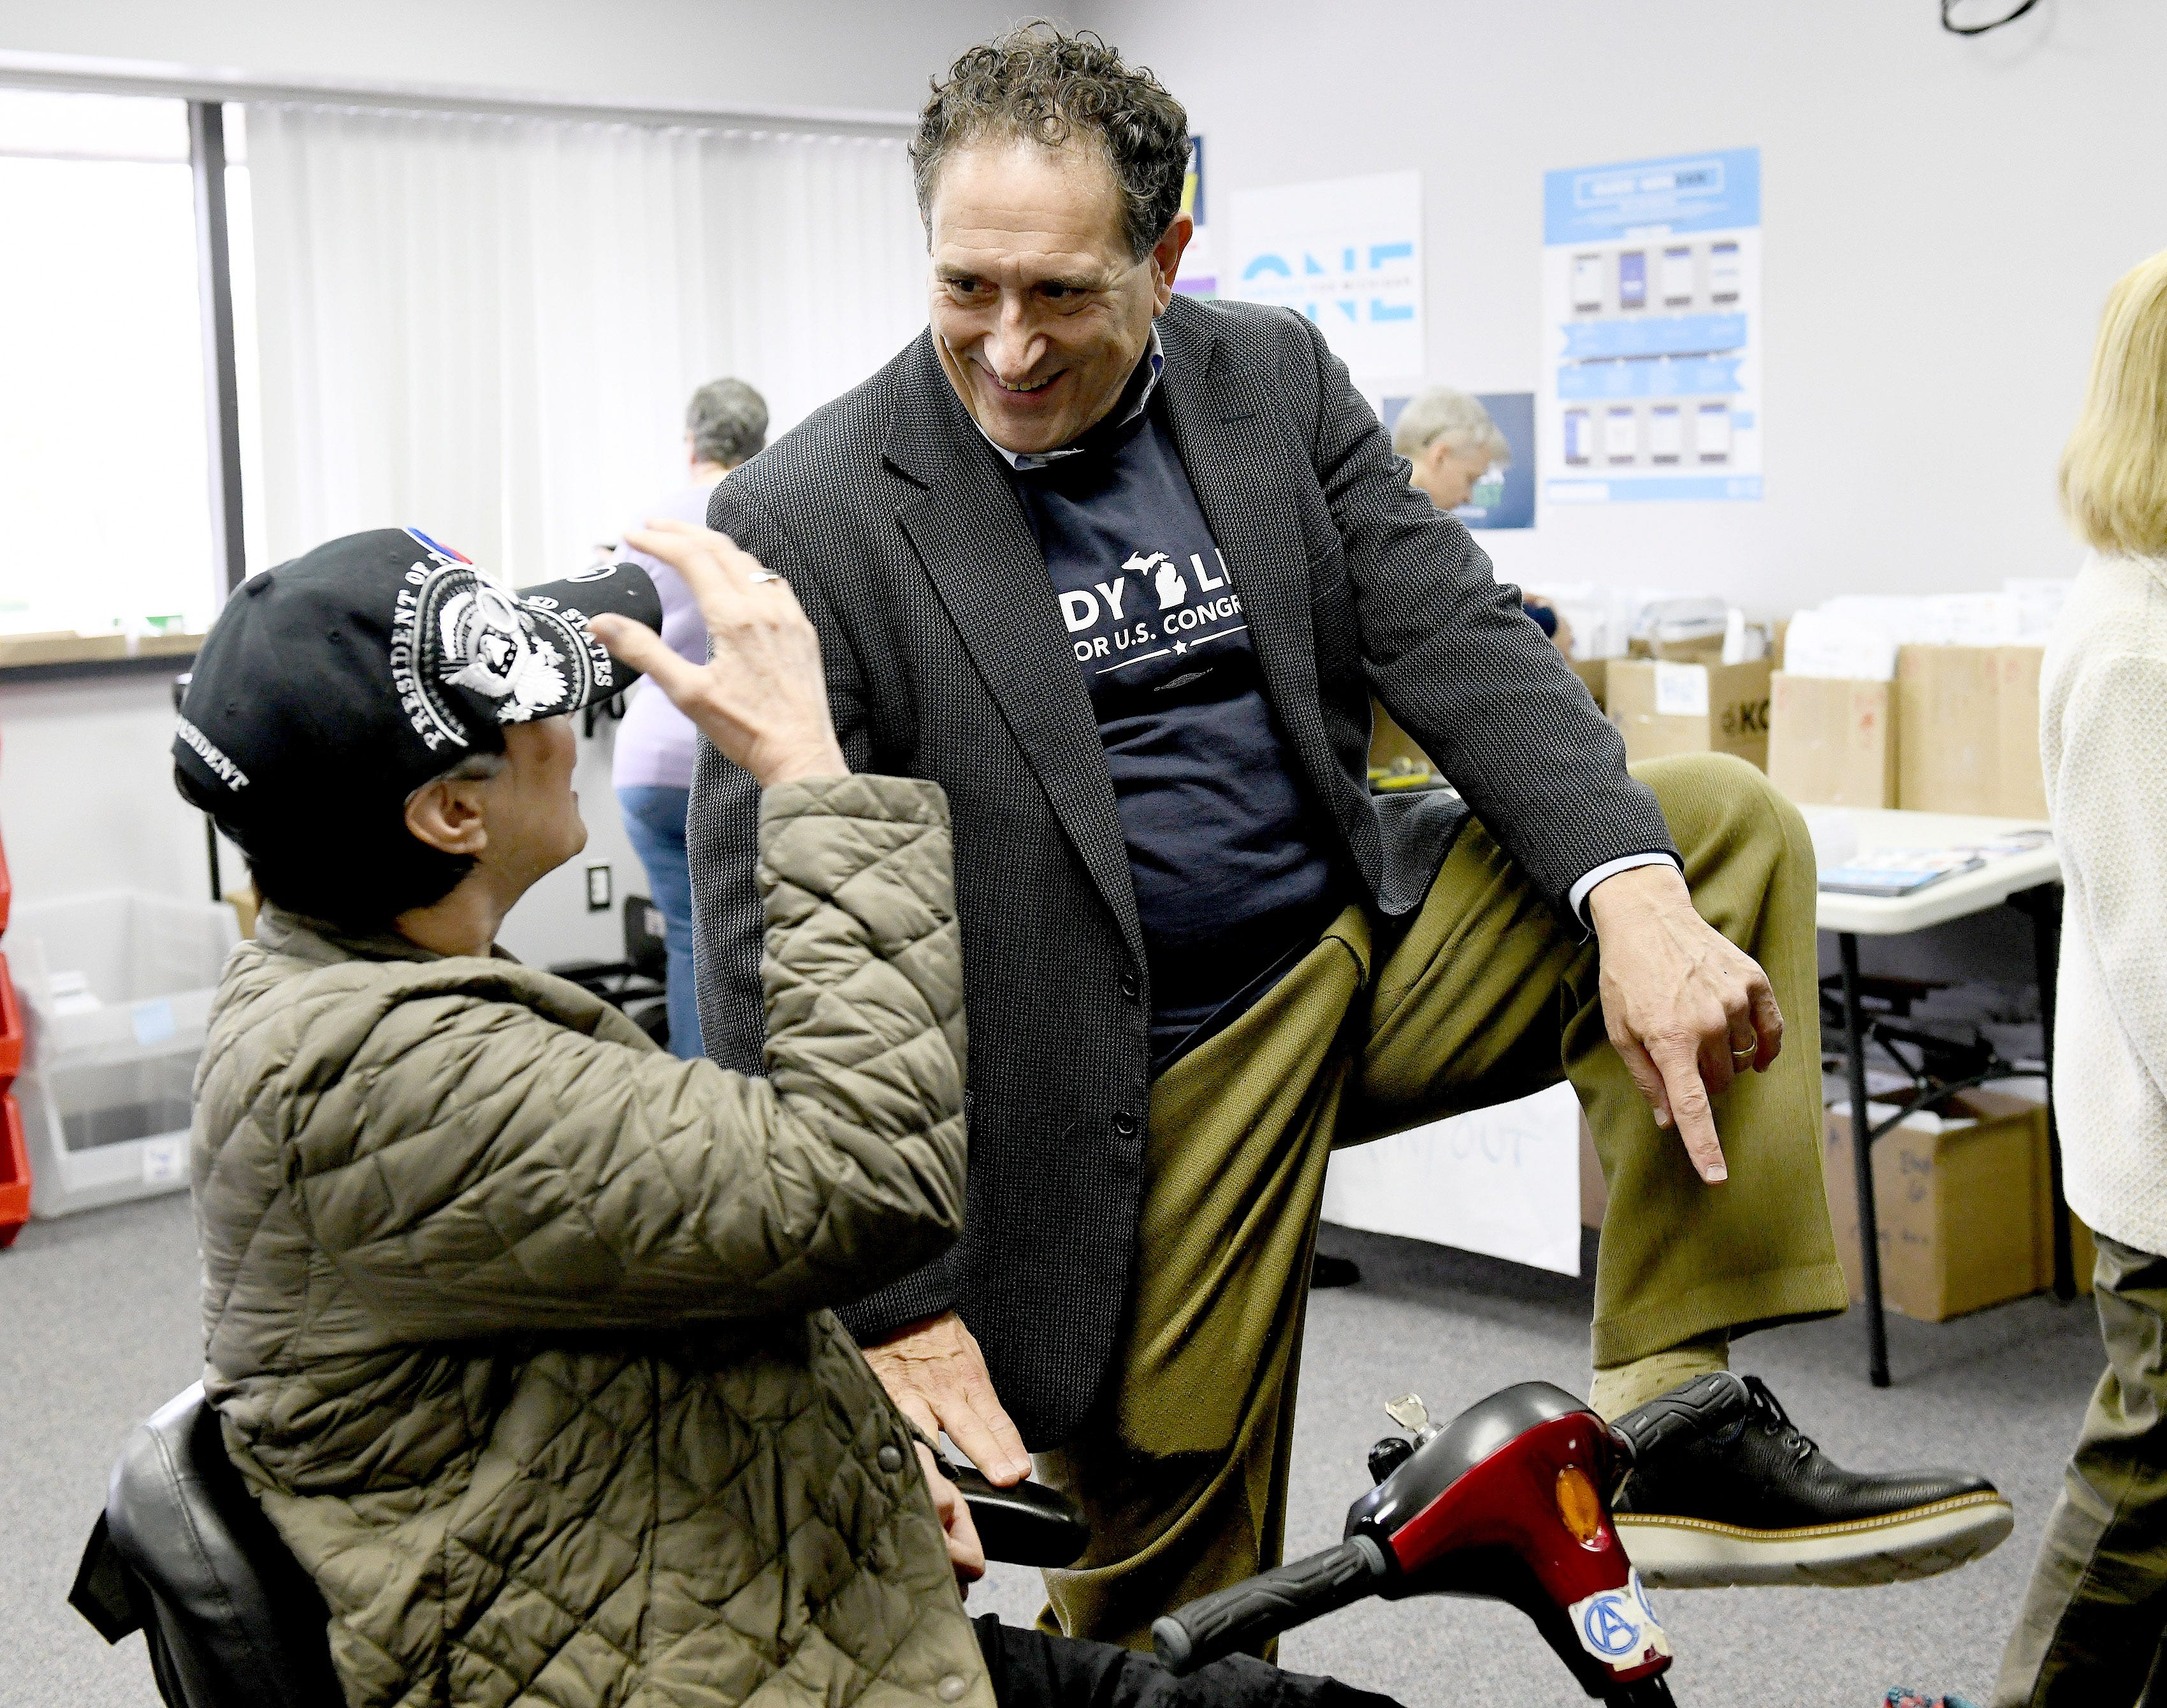 Democratic U.S. Congressional candidate in the 9th District Andy Levin, right, shows his new walking shoes to supporter Ann Serafin of Ferndale after a rally  in Madison Heights, Monday.